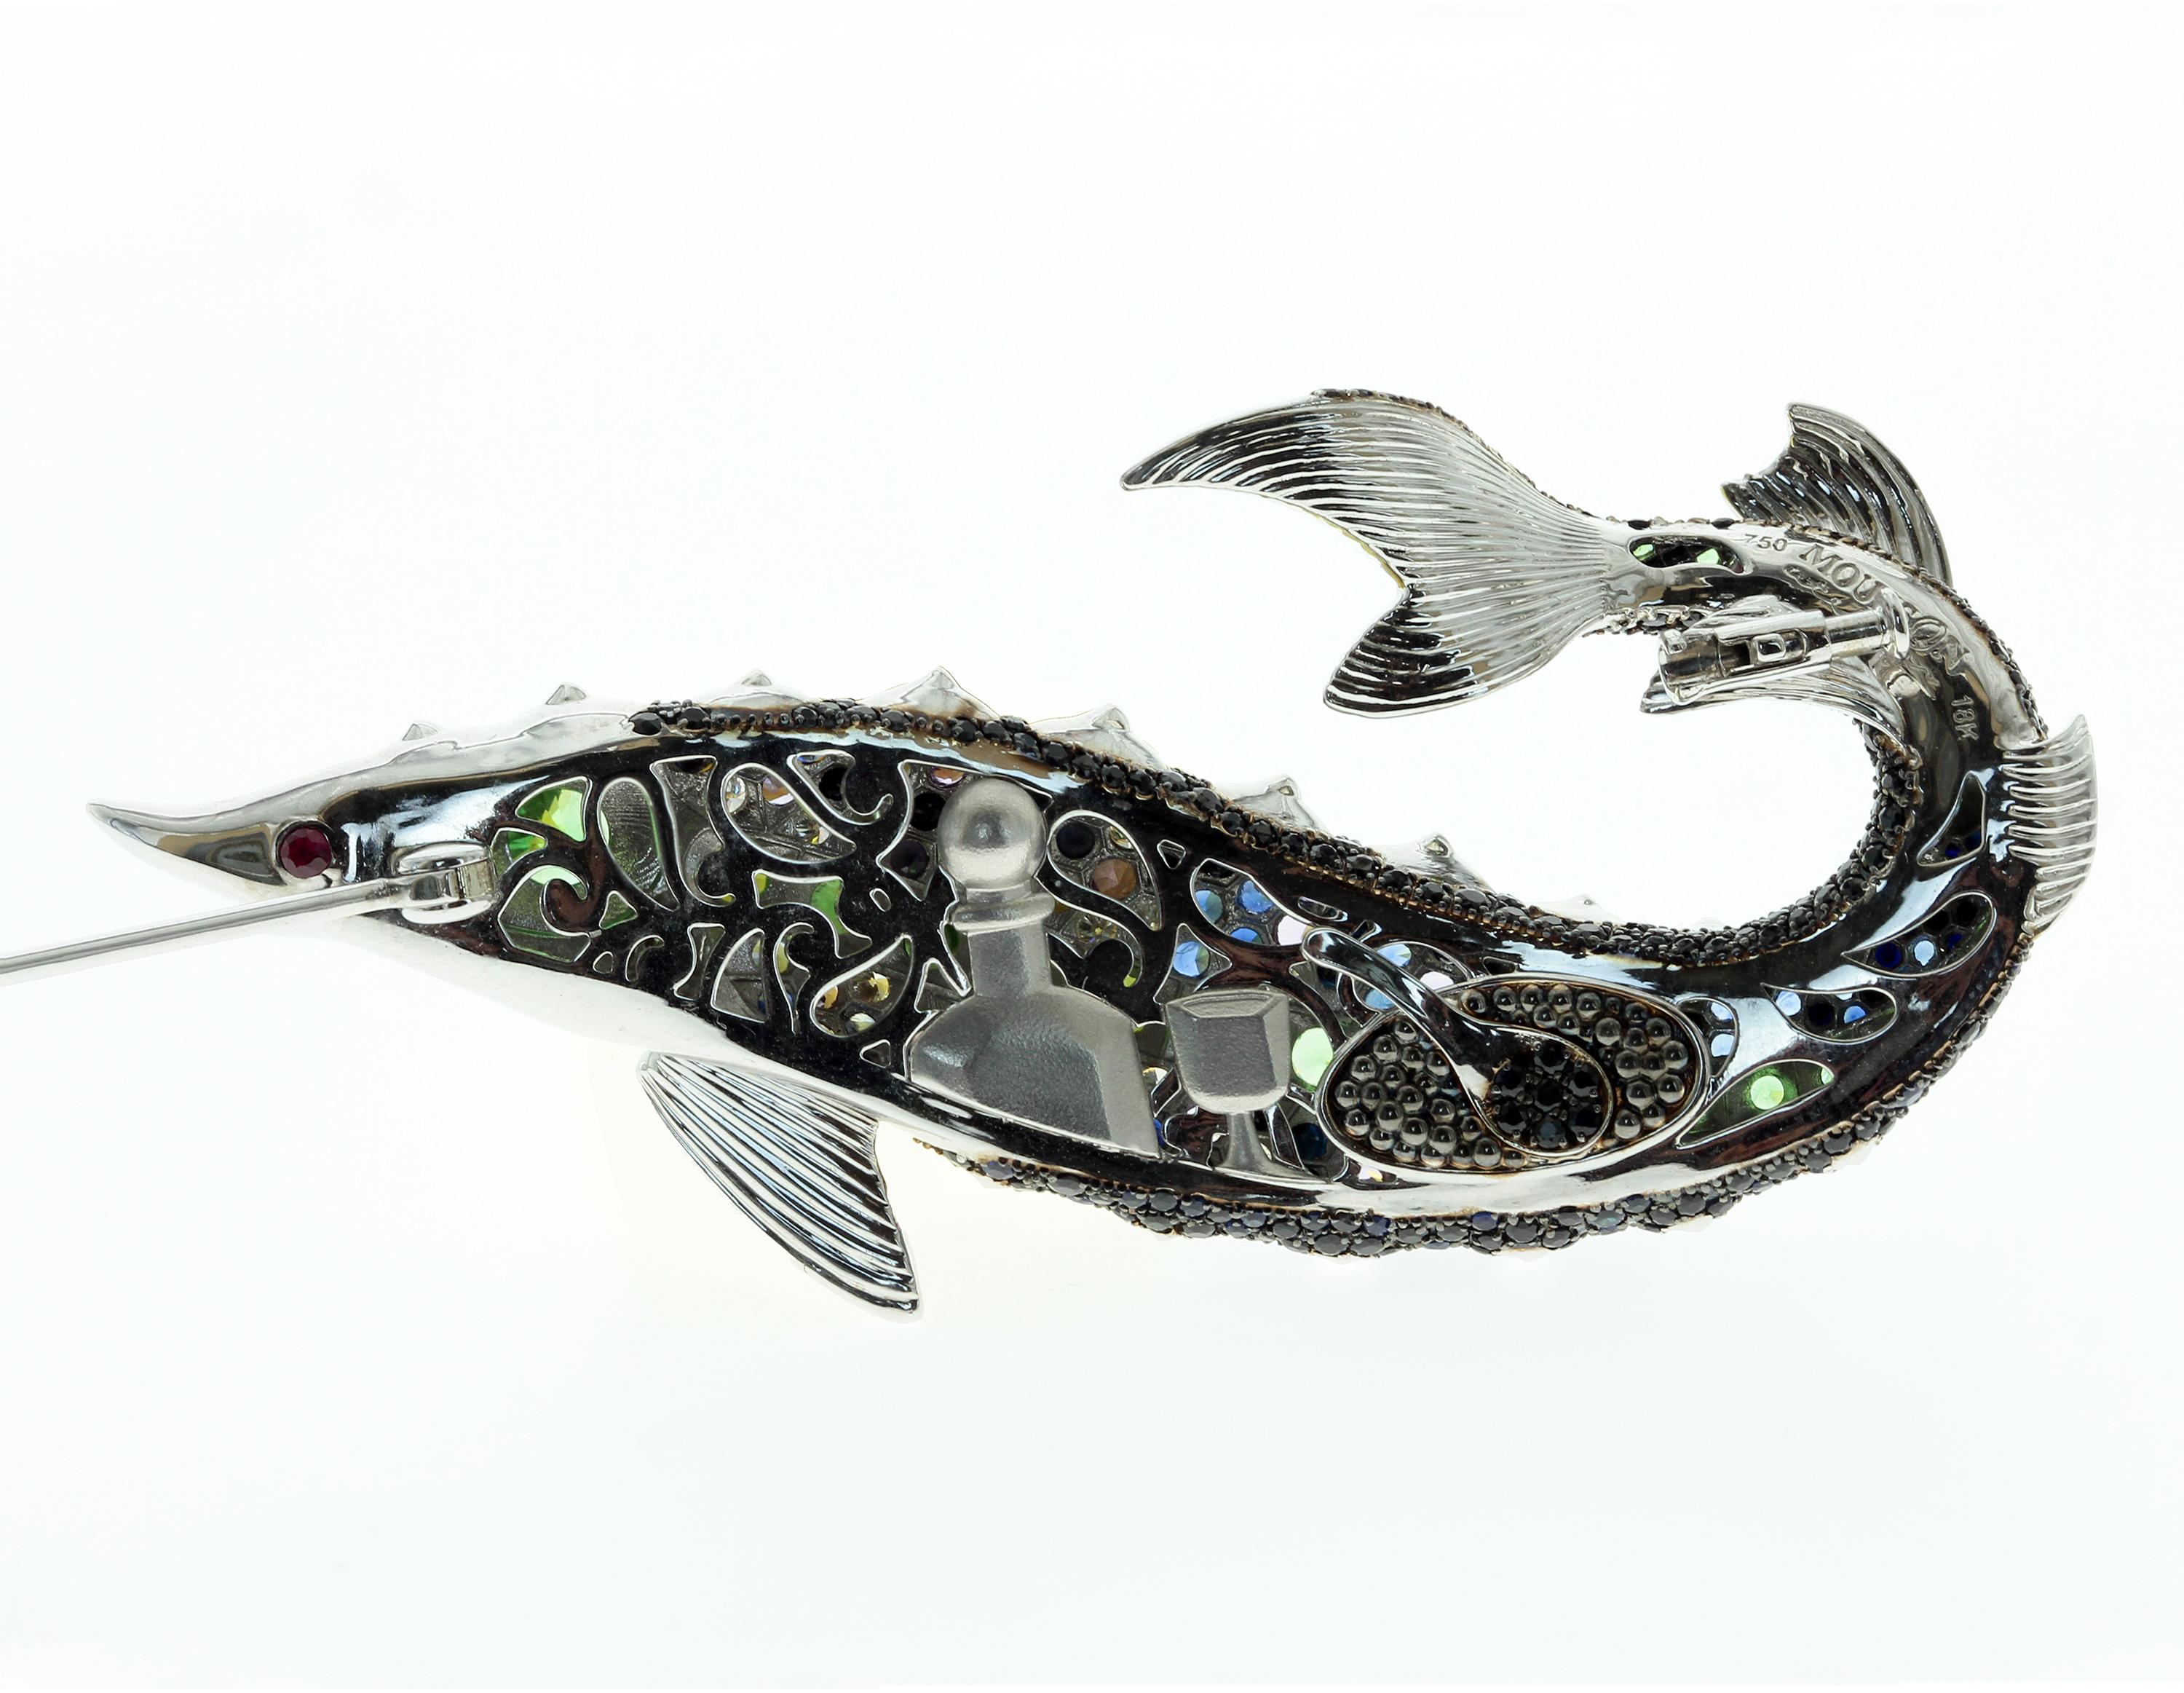 Diamond Sapphire Tsavorite 18 Karat Black Gold Sturgeon Brooch
The Body consists of Tsavorites, Sapphires and Diamonds. High Detailing. On the back side some reference to the Russian culture, Black Caviar and off-course cold Vodka.

72mm x 35mm x